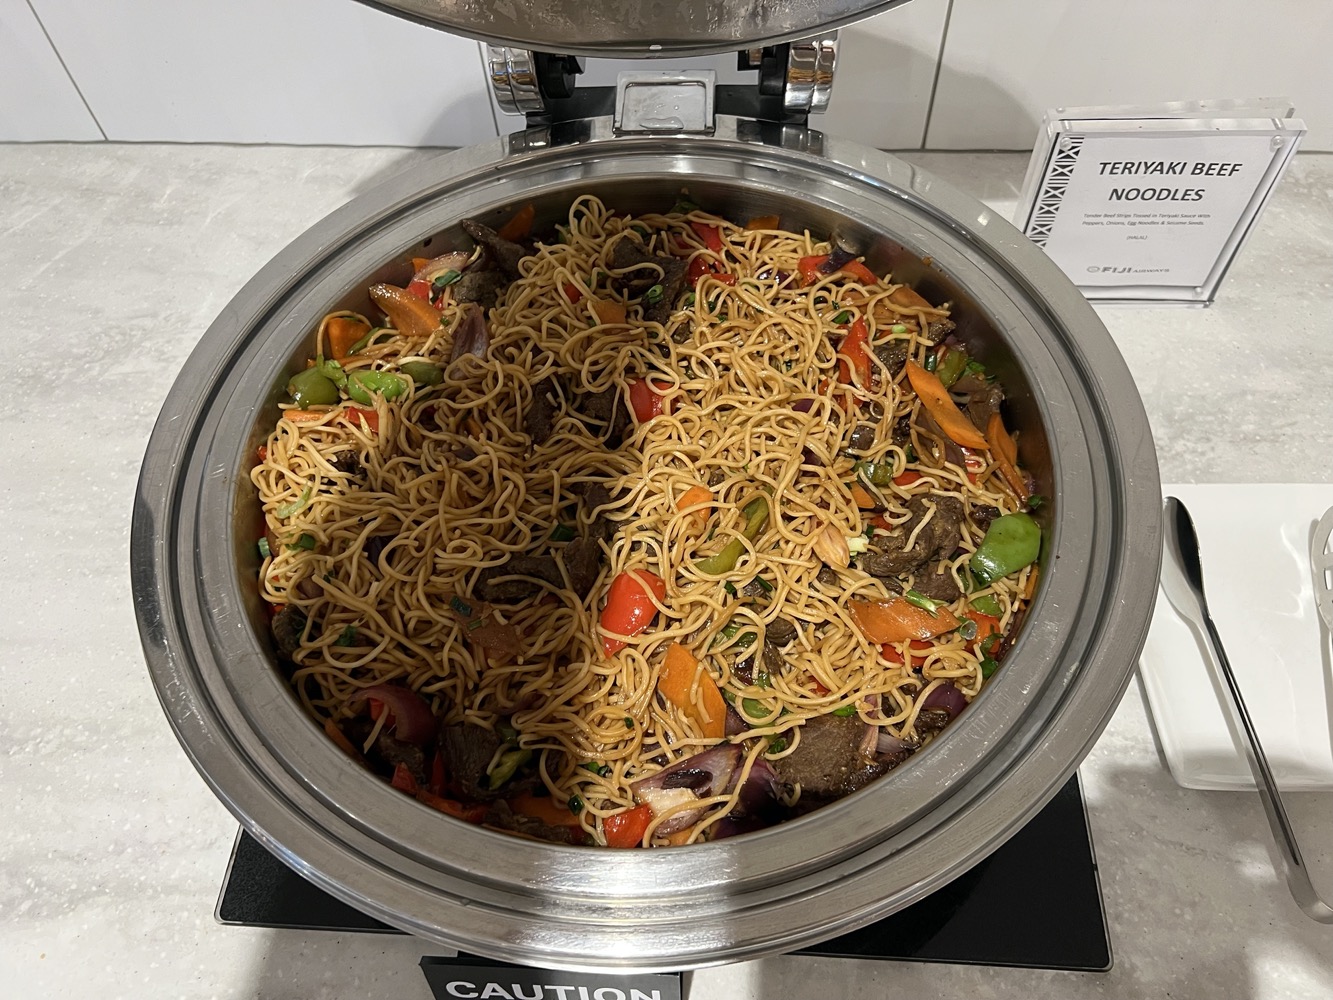 a bowl of noodles and vegetables